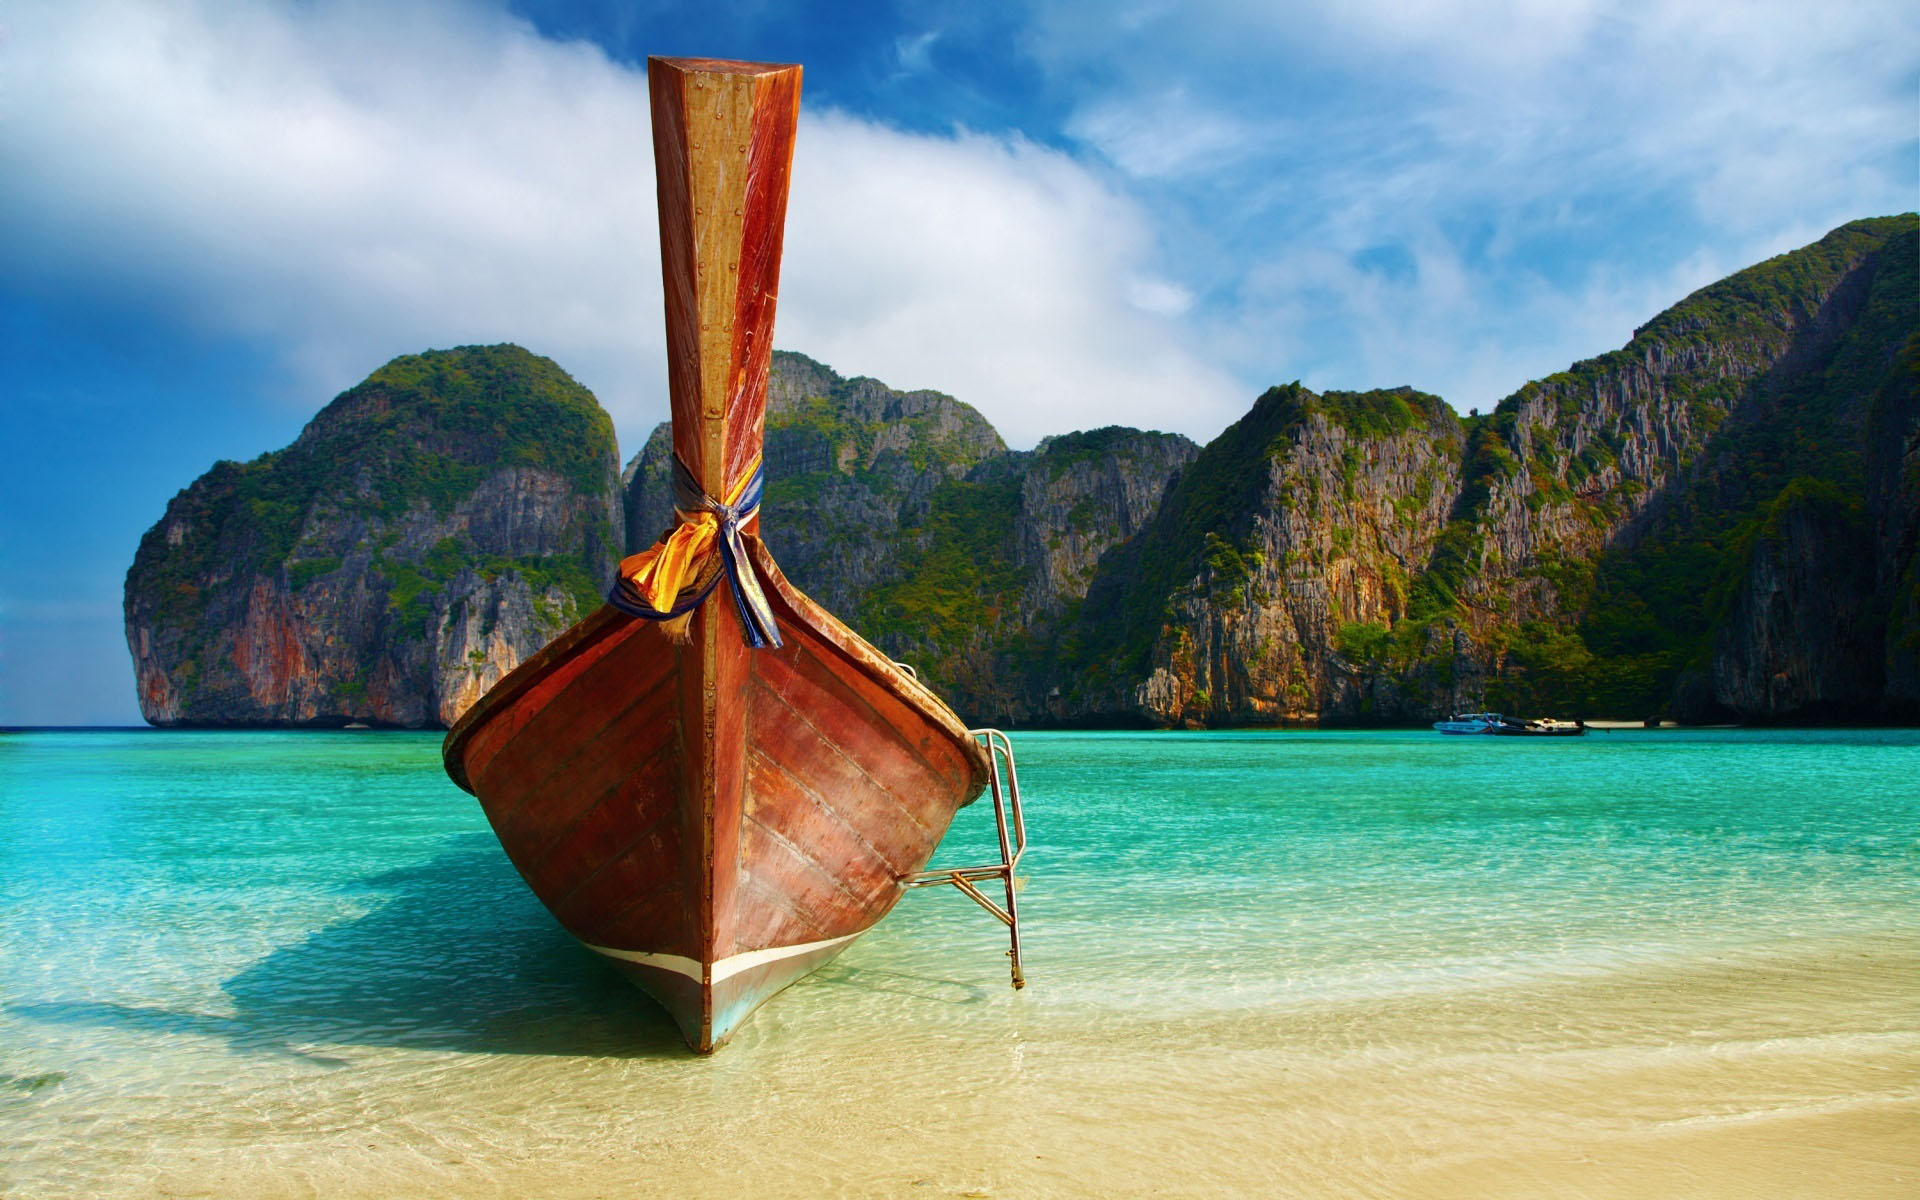 Download mobile wallpaper Nature, Beach, Ocean, Earth, Boat, Canoe, Coastline, Thailand, Vehicles for free.